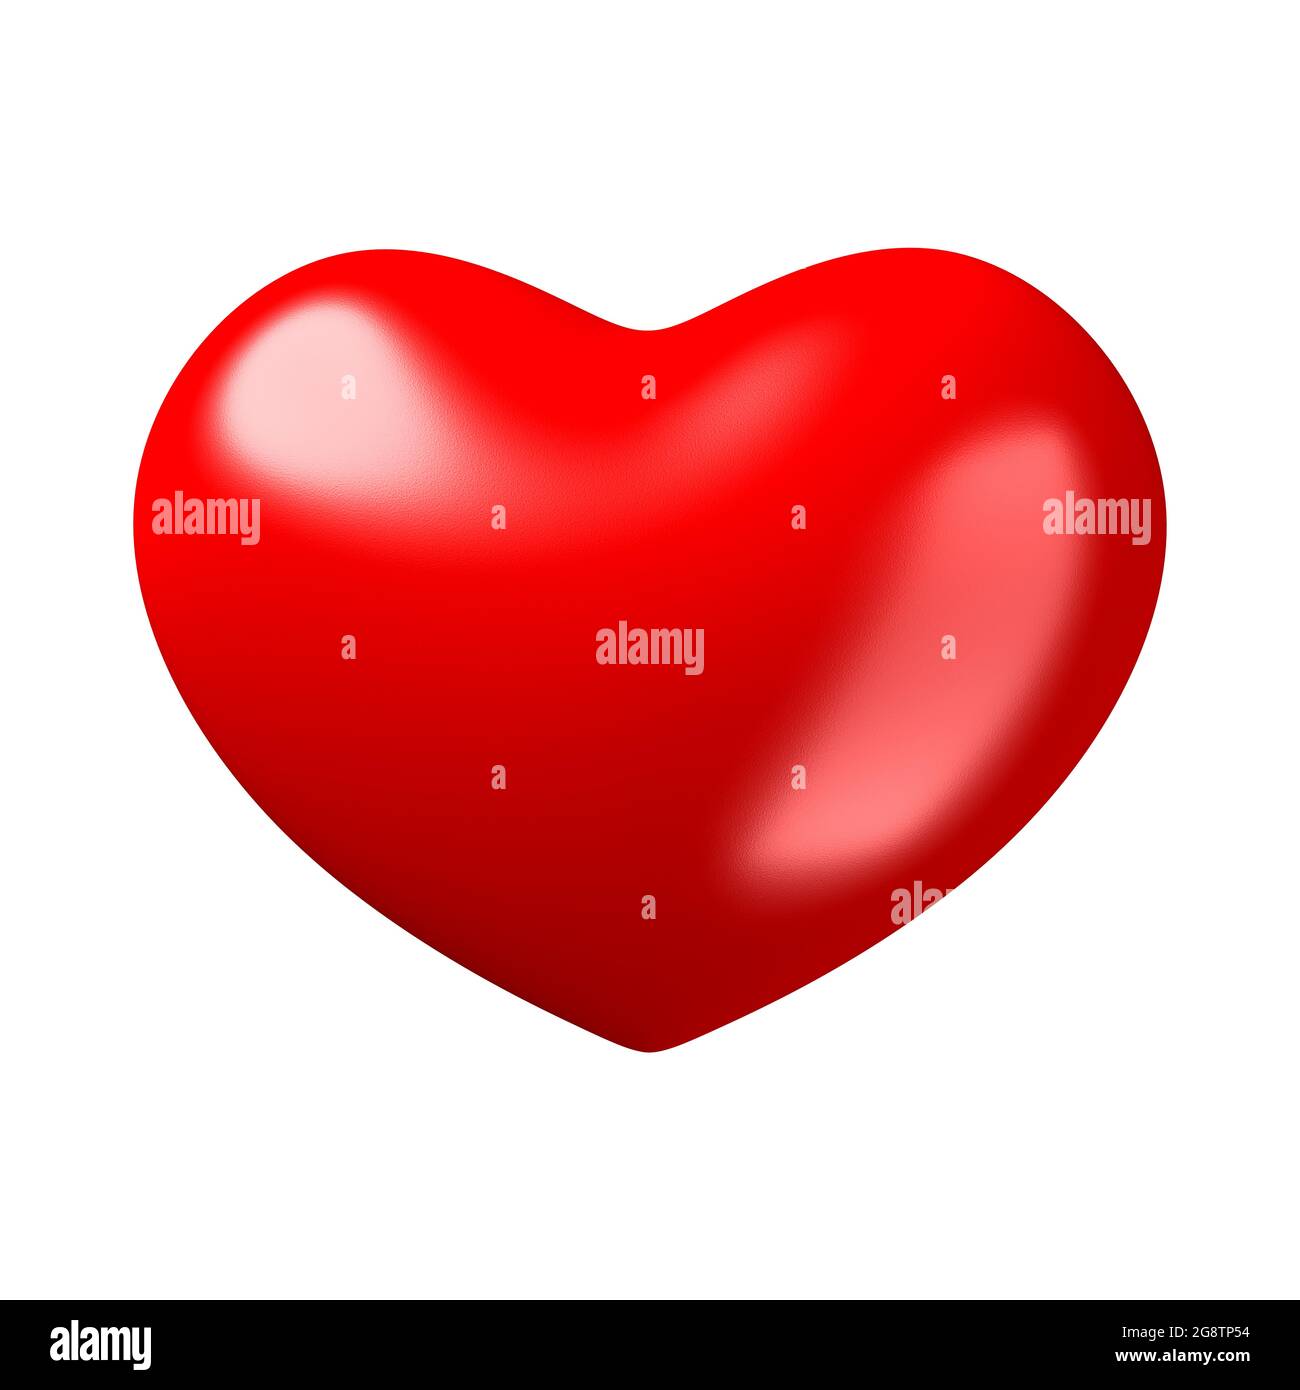 Red heart isolated on white background. 3d illustration. Valentine's day. Stock Photo